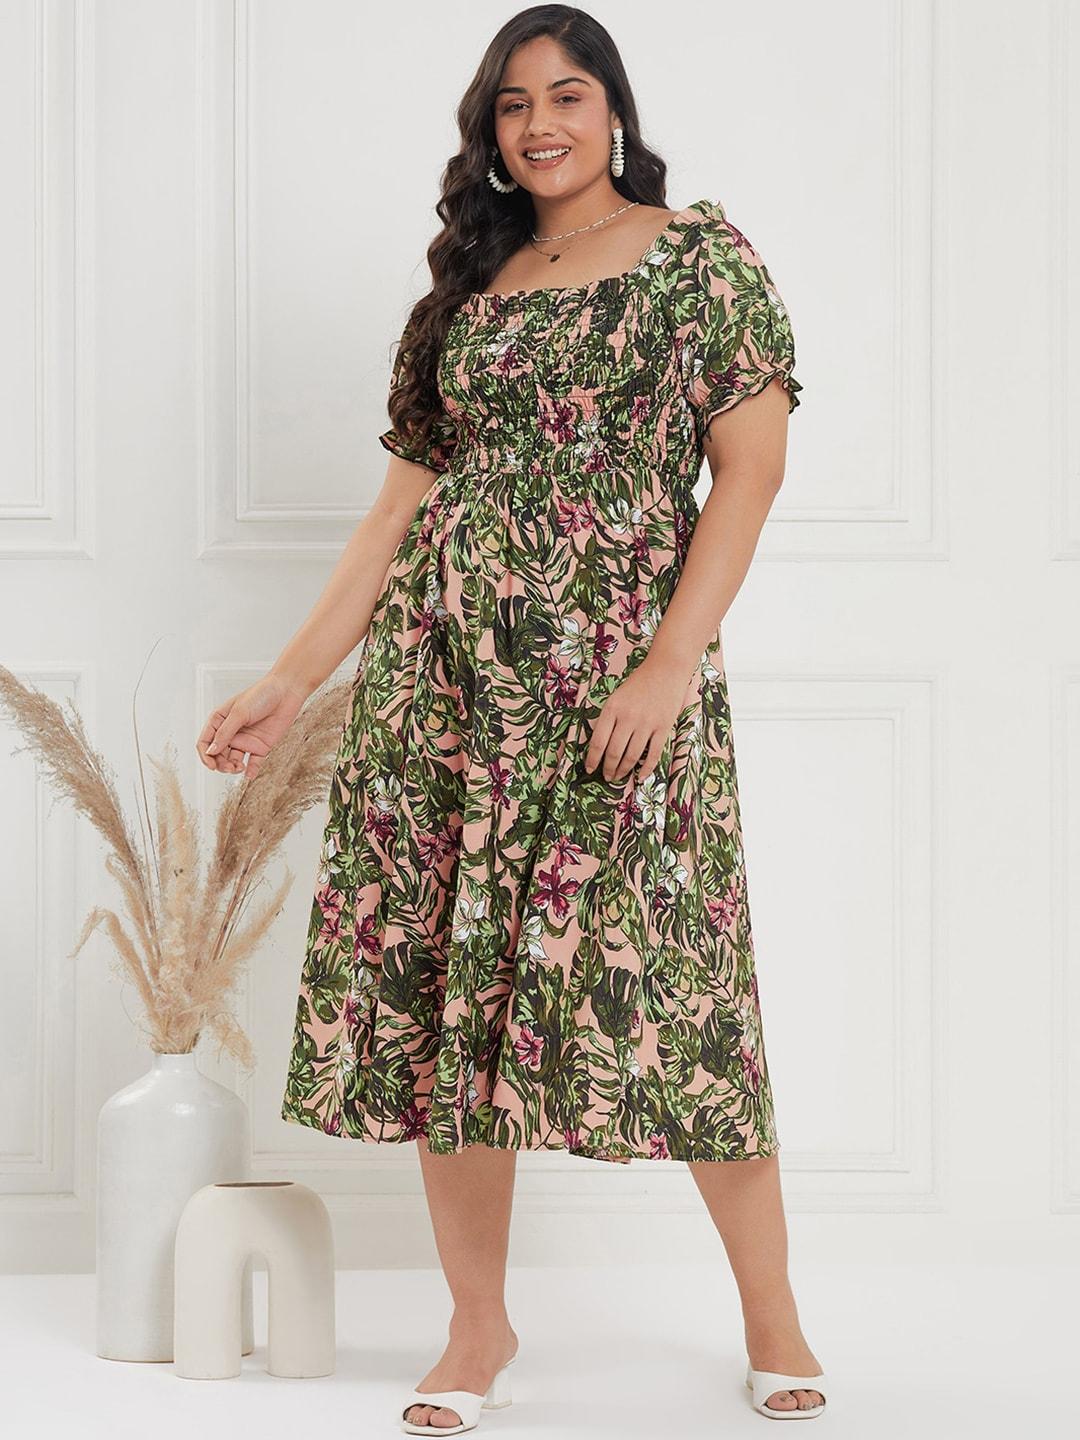 curve-by-kassually-green-plus-size-floral-printed-smocked--fit-&-flare-dress